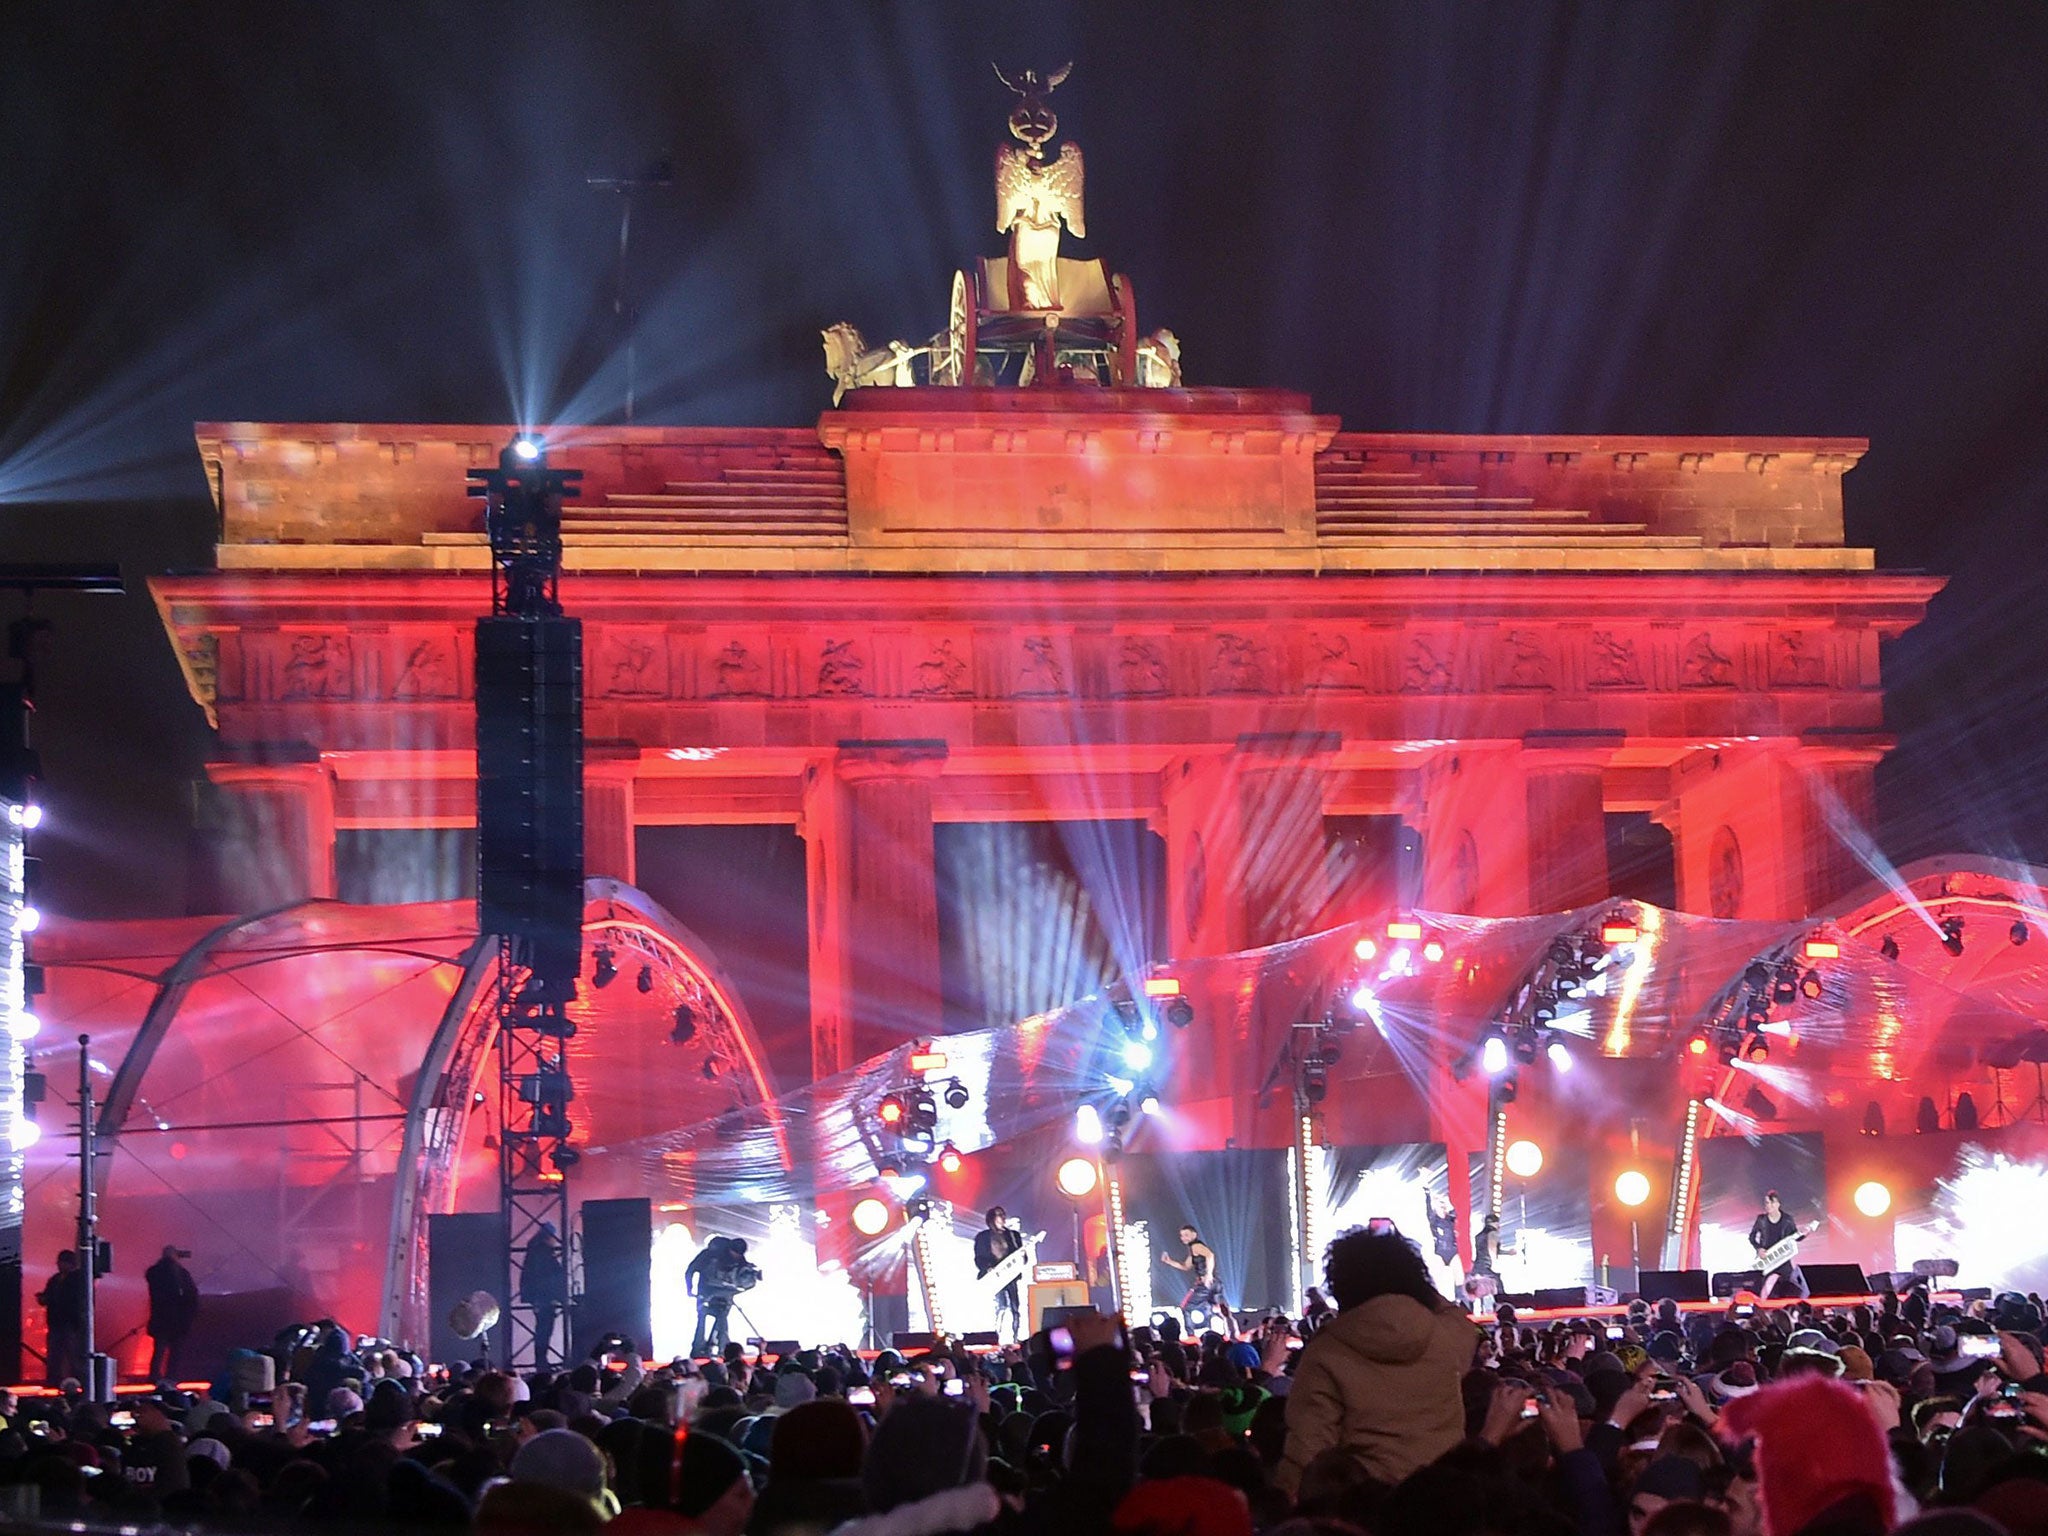 People attend the Year's Eve party by the Brandenburg Gate in Berlin, Germany, 31 December 2016.